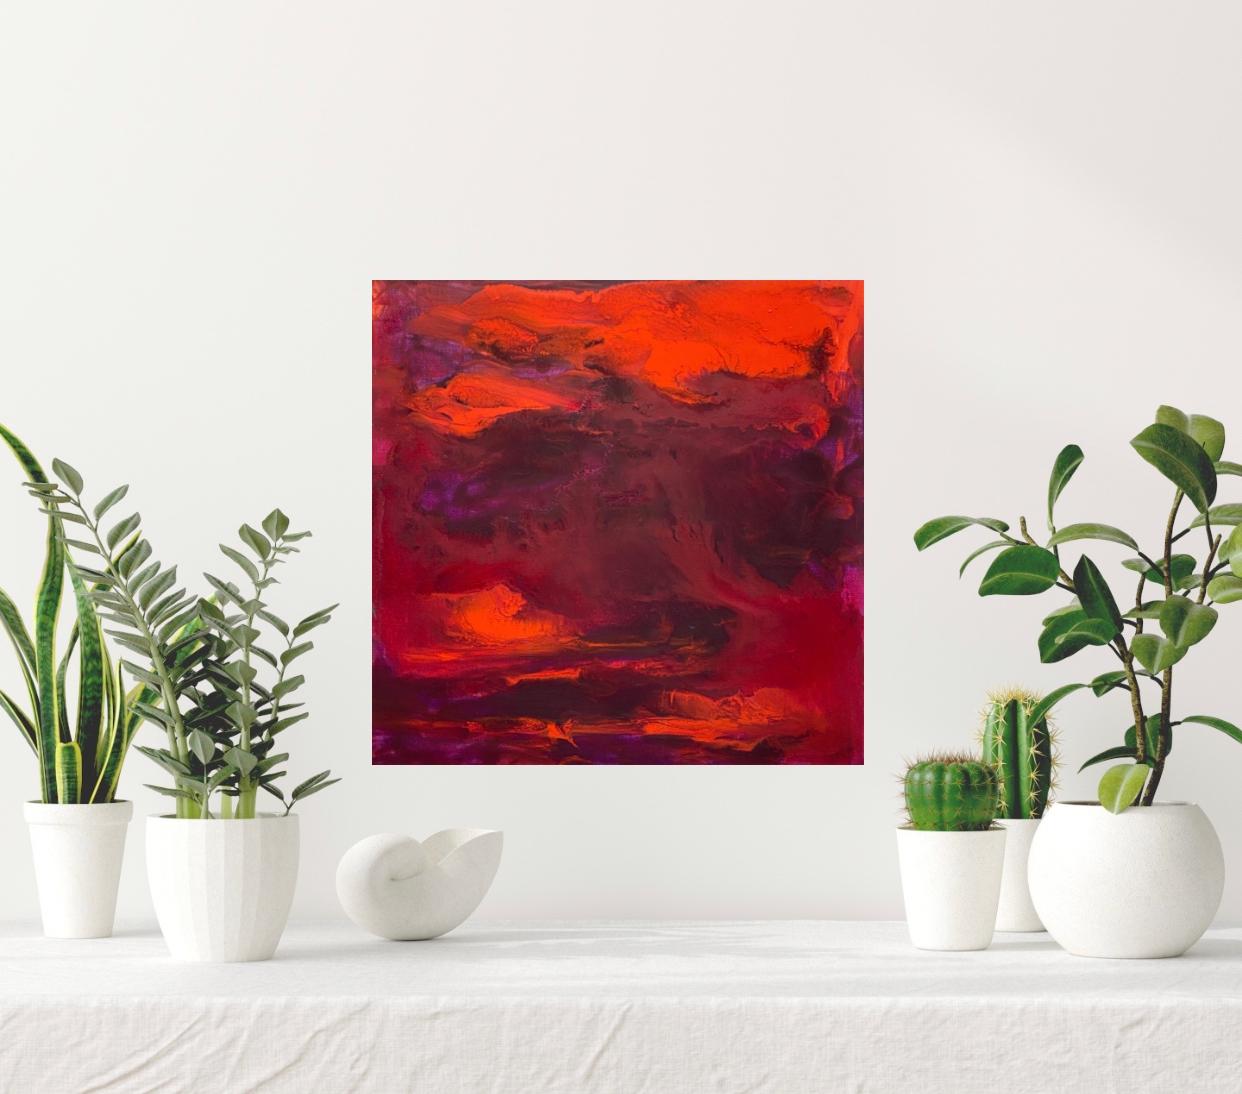 Sailor's delight, Contemporary painting with bold reds, oranges and violets 15